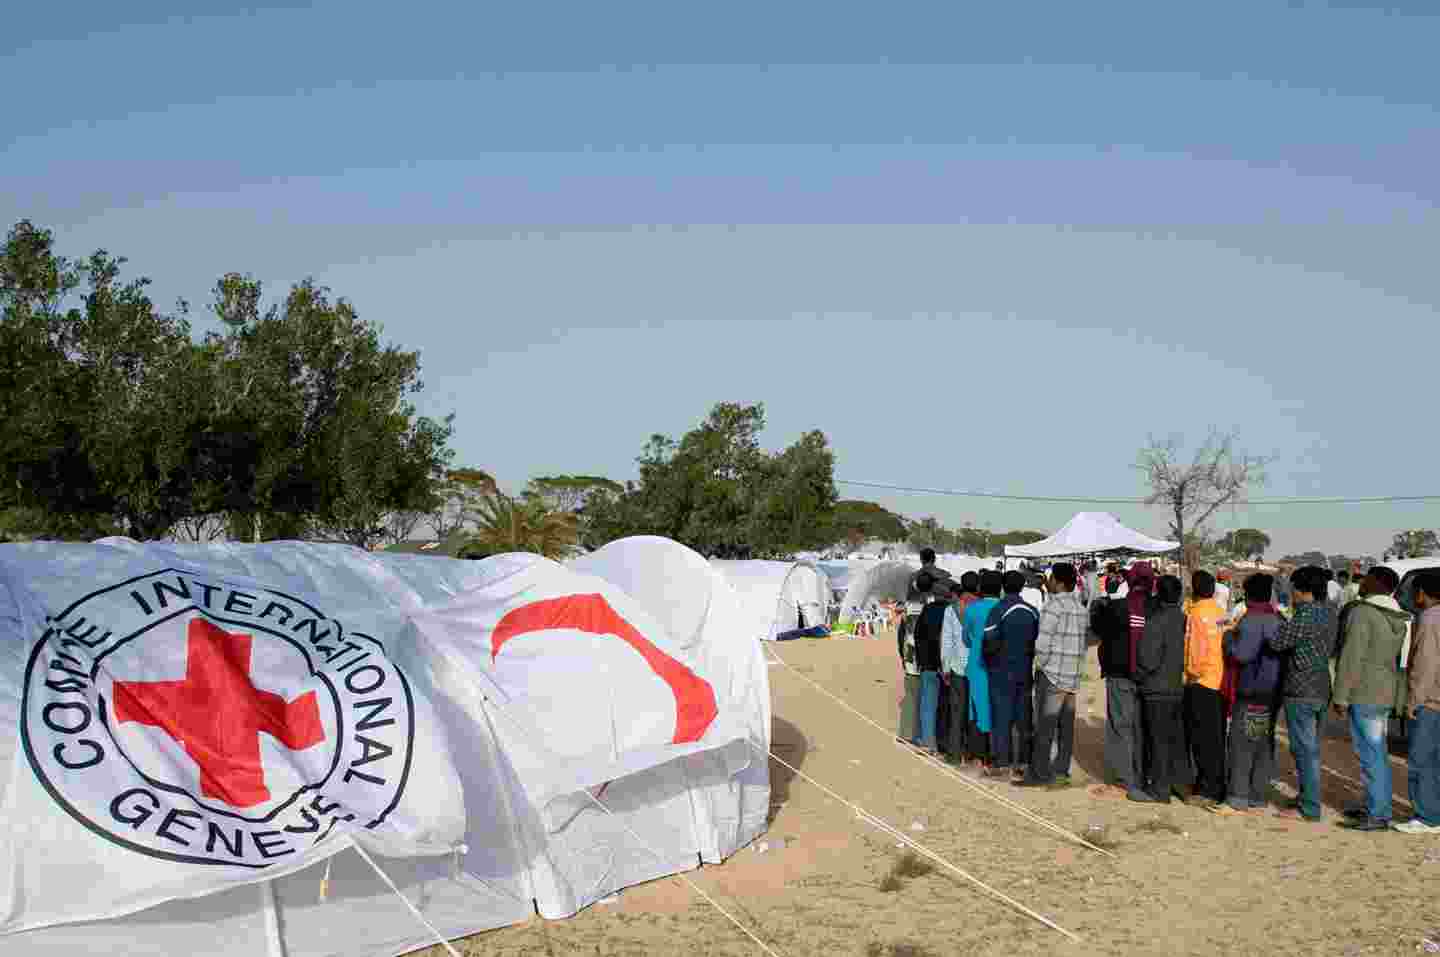 People queueing at a refugee camp among tents equipped with the Red Cross symbols.